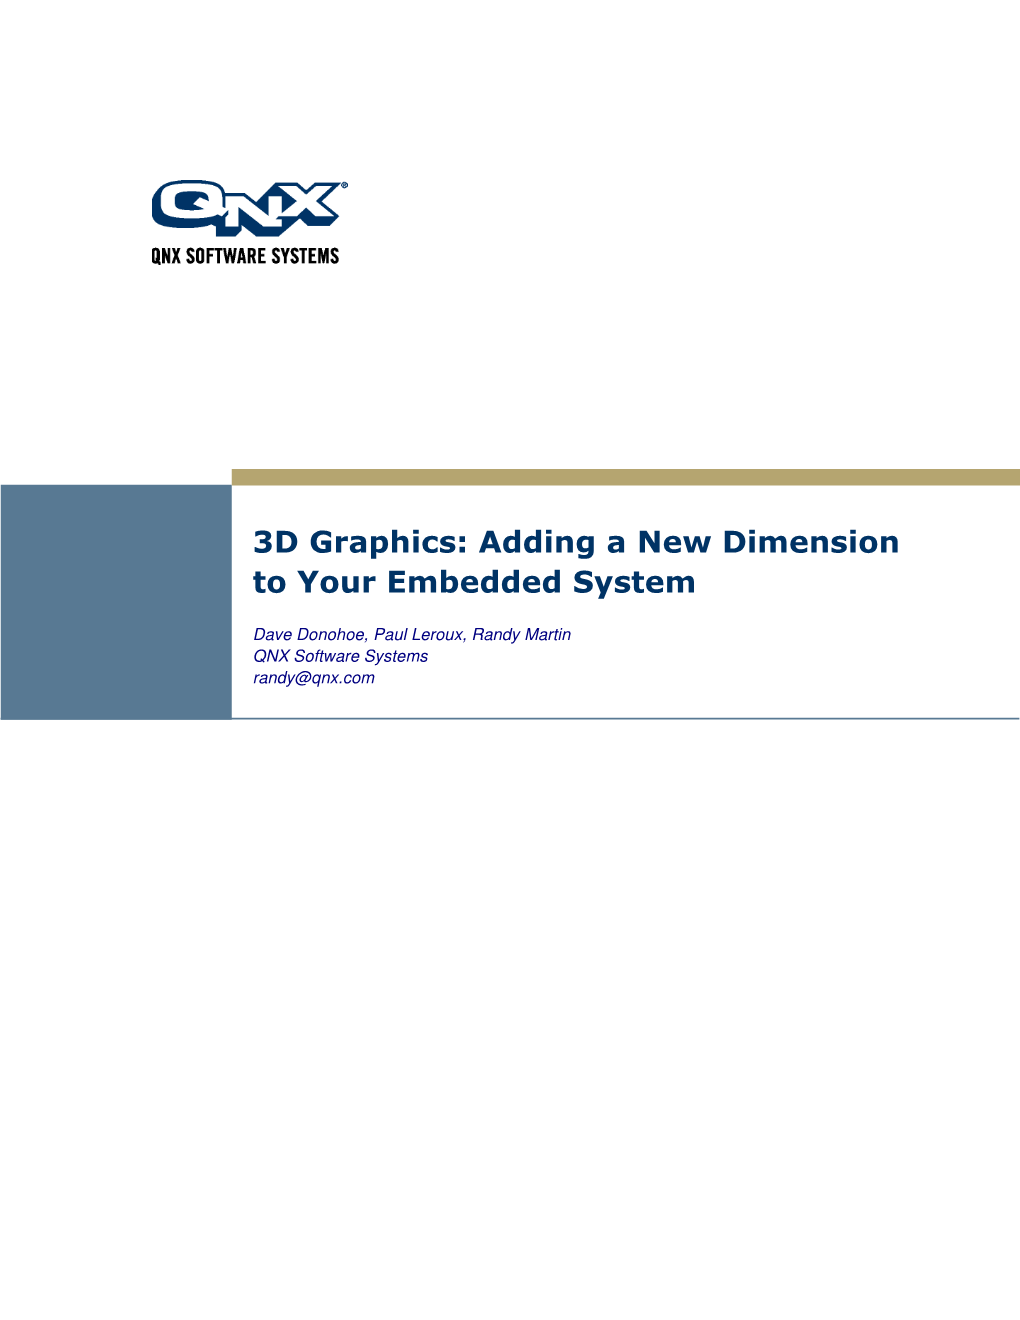 3D Graphics: Adding a New Dimension to Your Embedded System